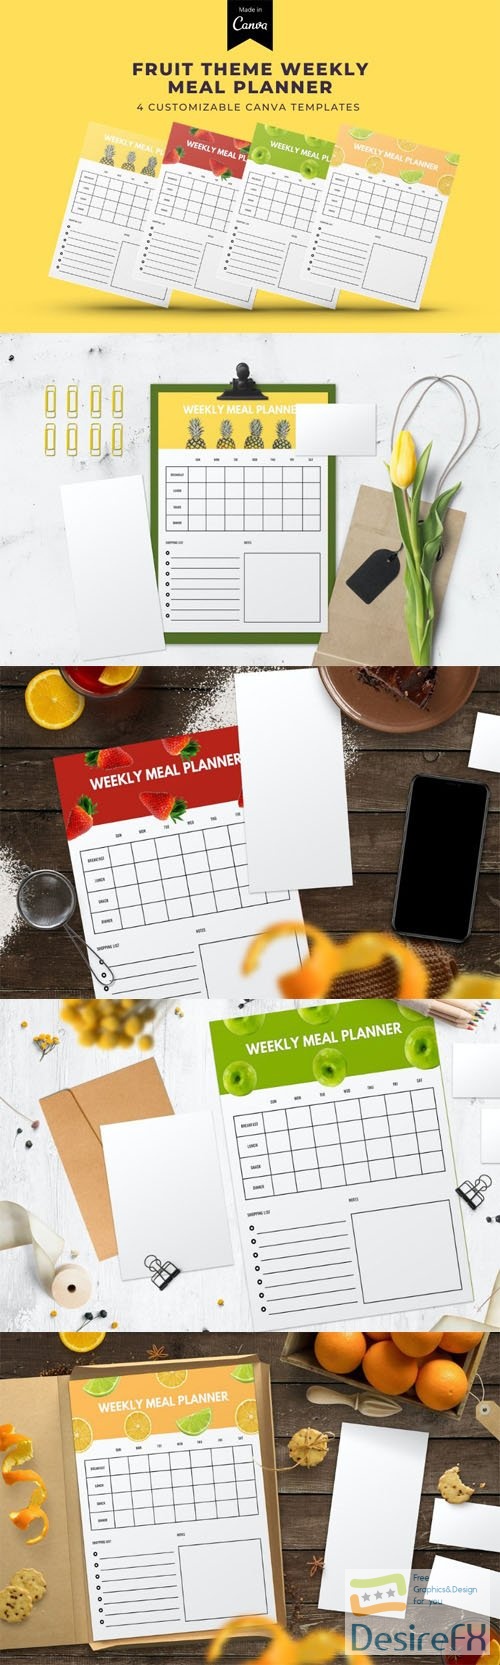 Fruit Theme Weekly Meal Planner - 4 Customizable Templates